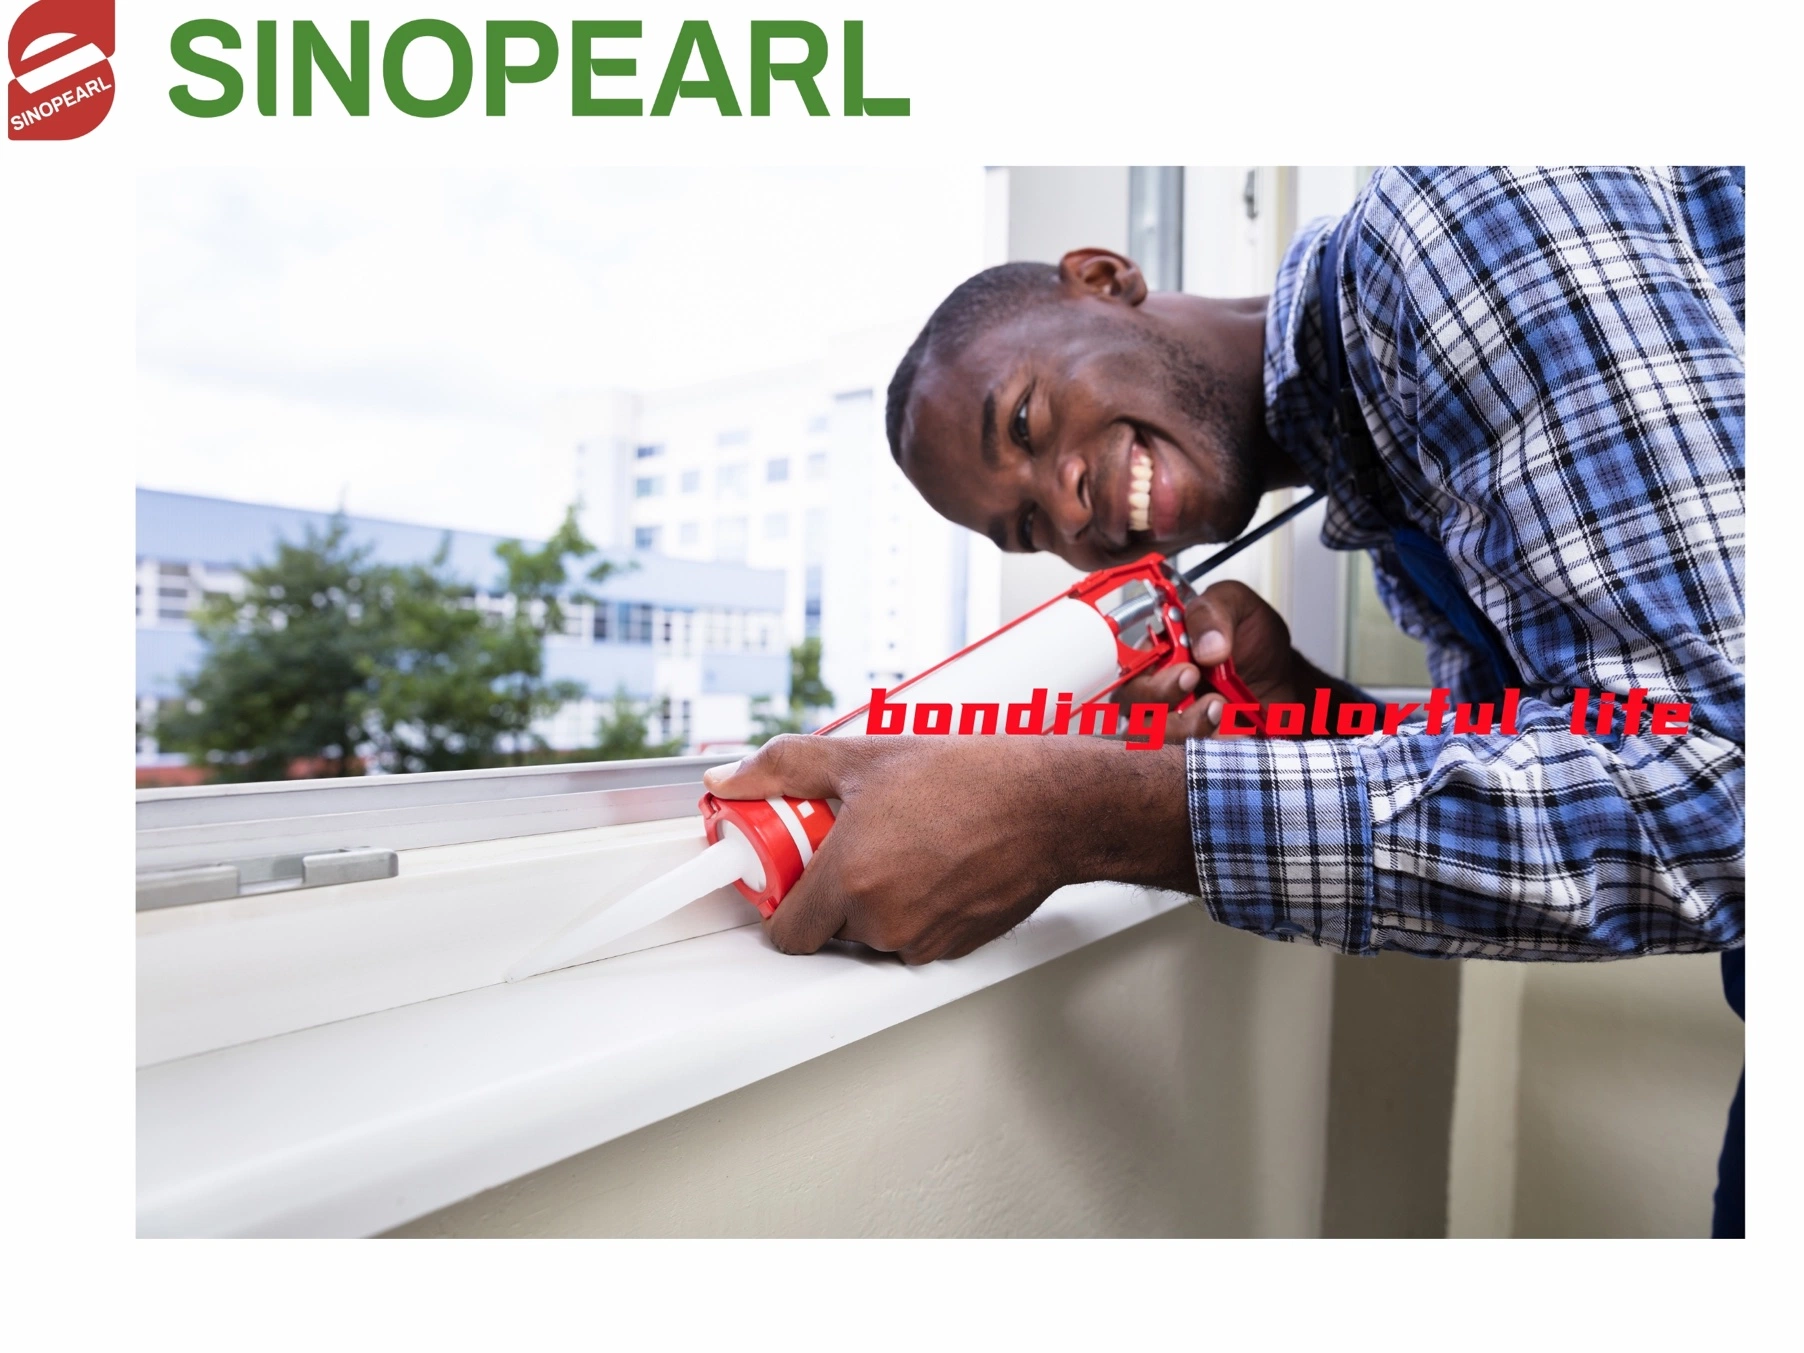 Sinopearl Bond Neutral Silicone Sealant Caulk Agent for Door and Window Weatherproof Made in China